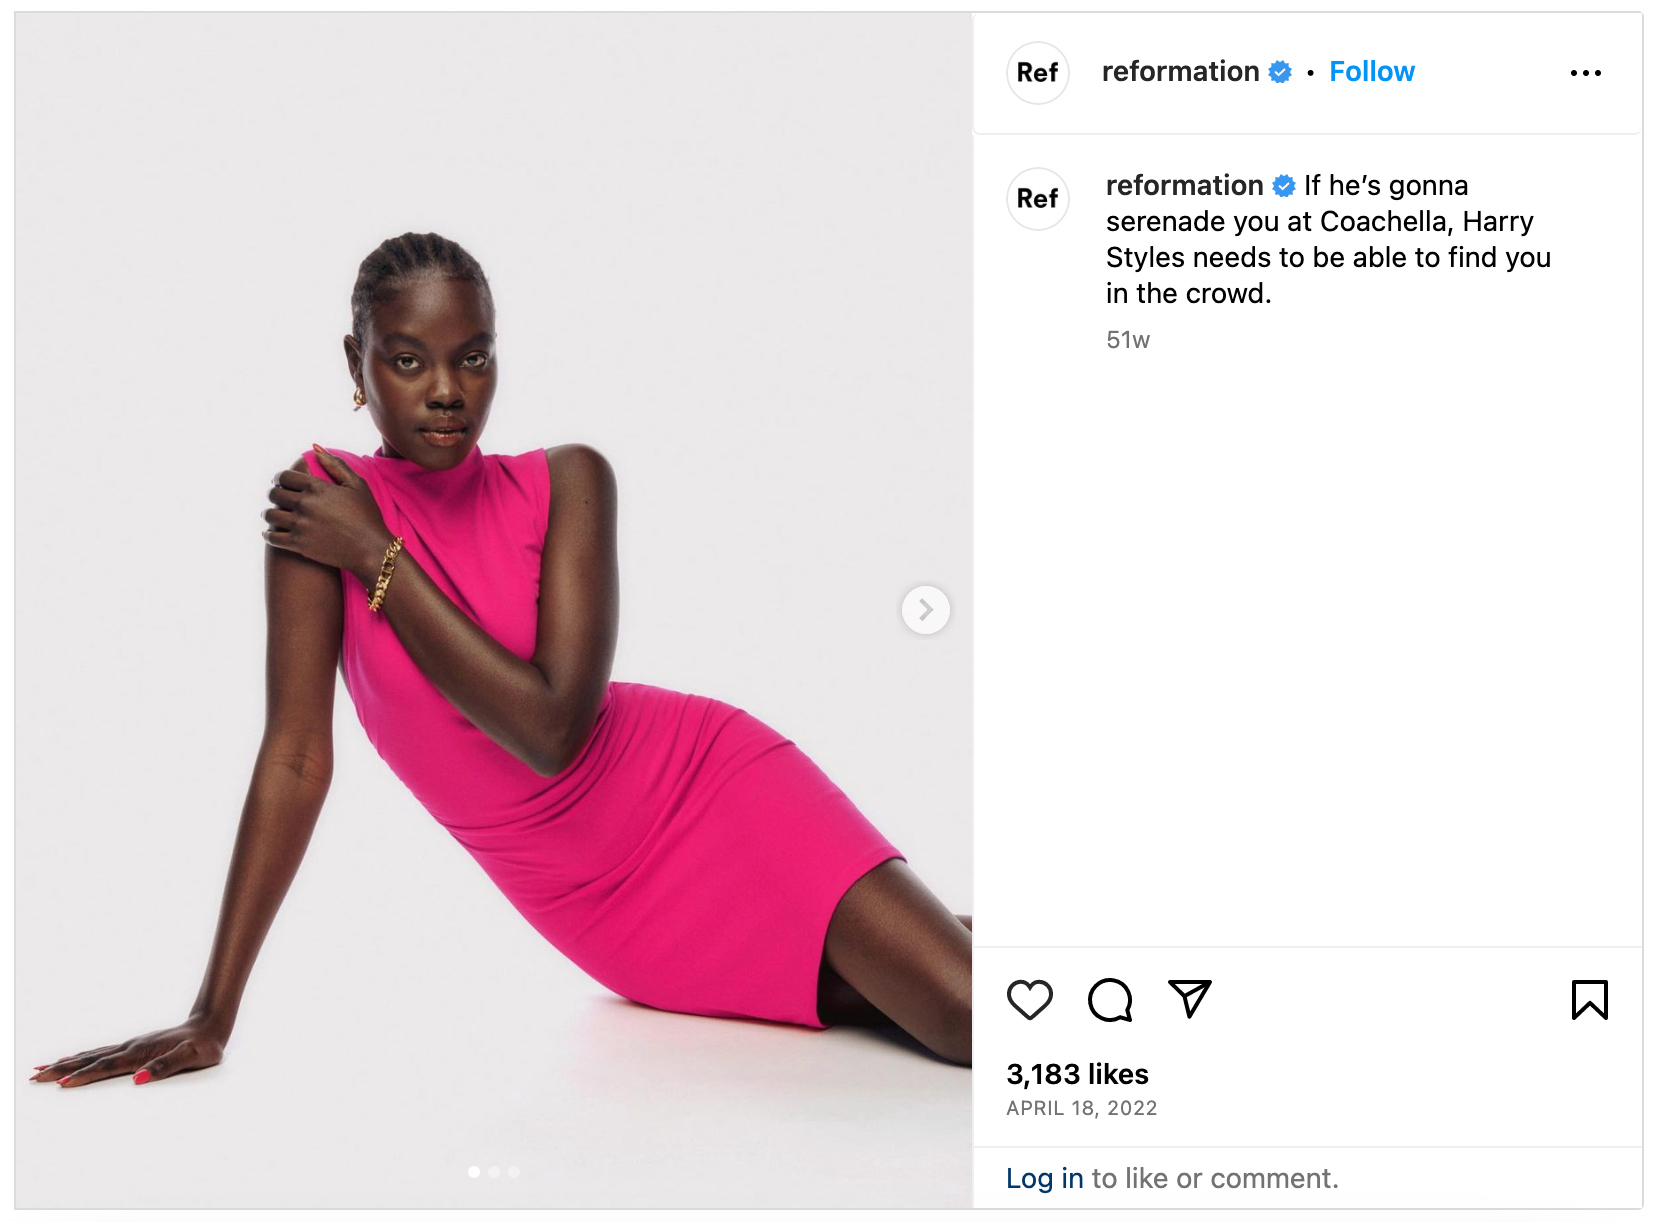 A screenshot of a woman in a hot pink dress next to a Reformation social media posting